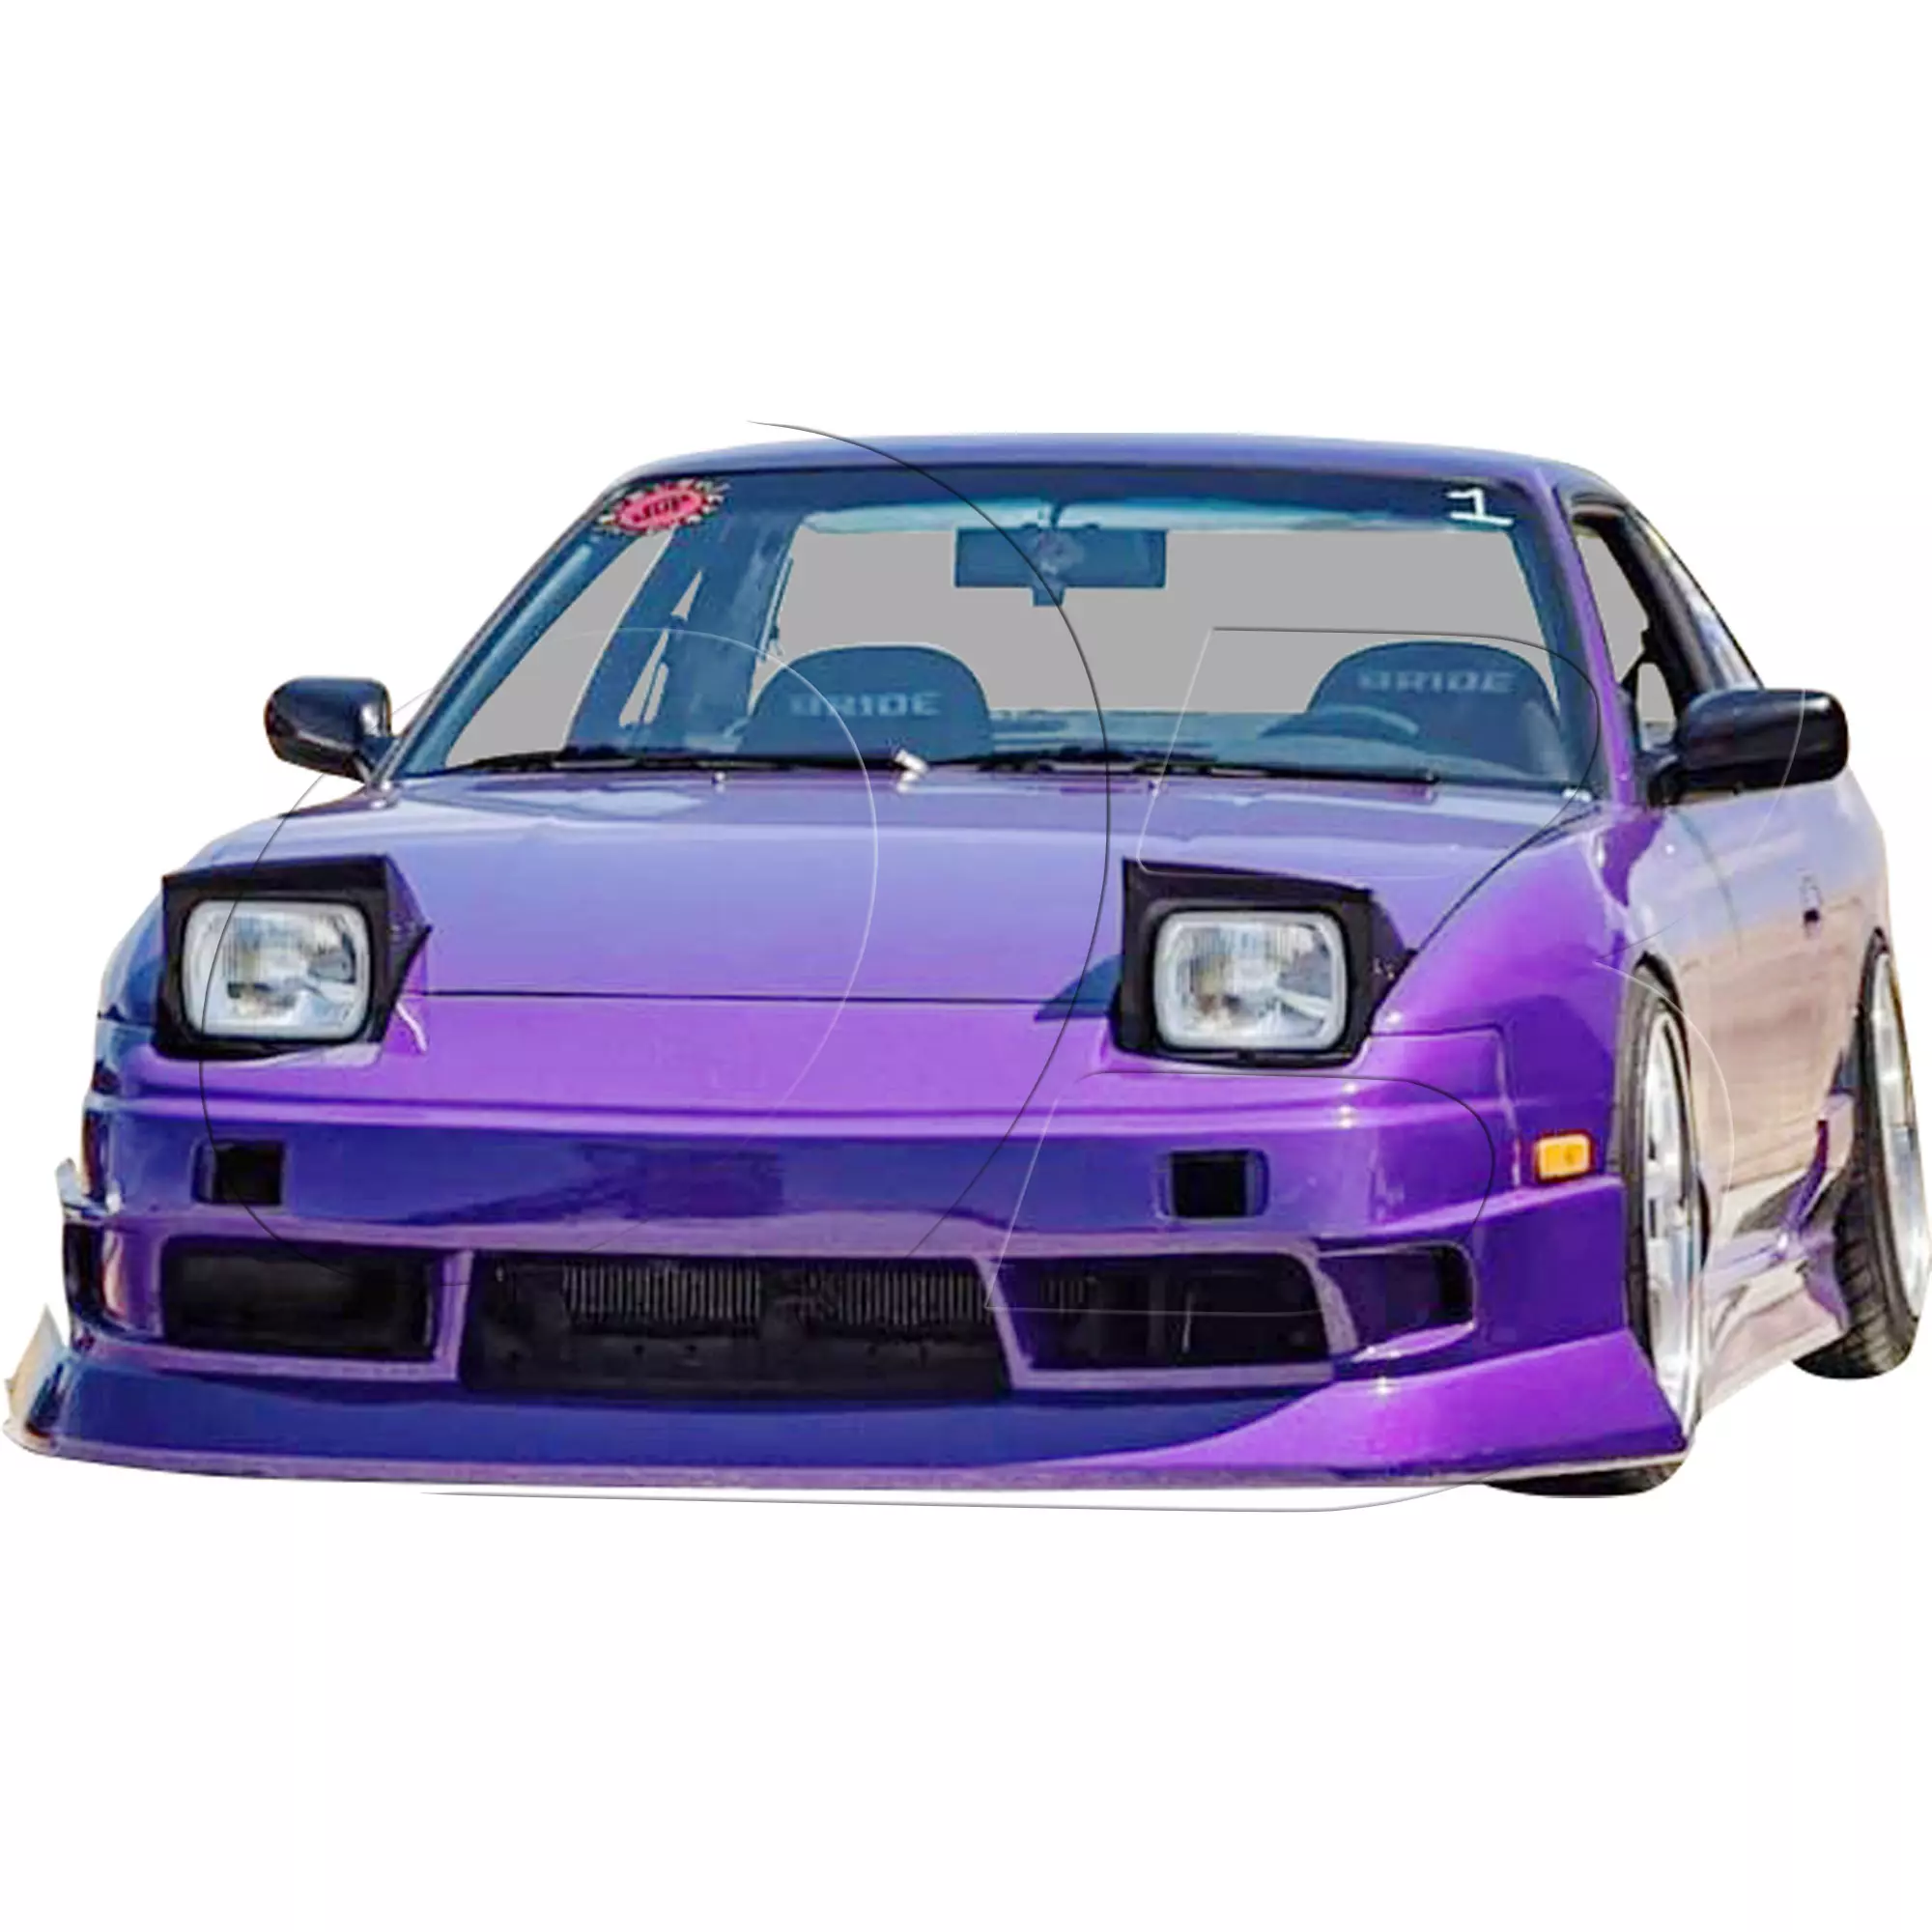 KBD Urethane Bsport2 Style 4pc Full Body Kit > Nissan 240SX 1989-1994 > 2dr Coupe - Image 9